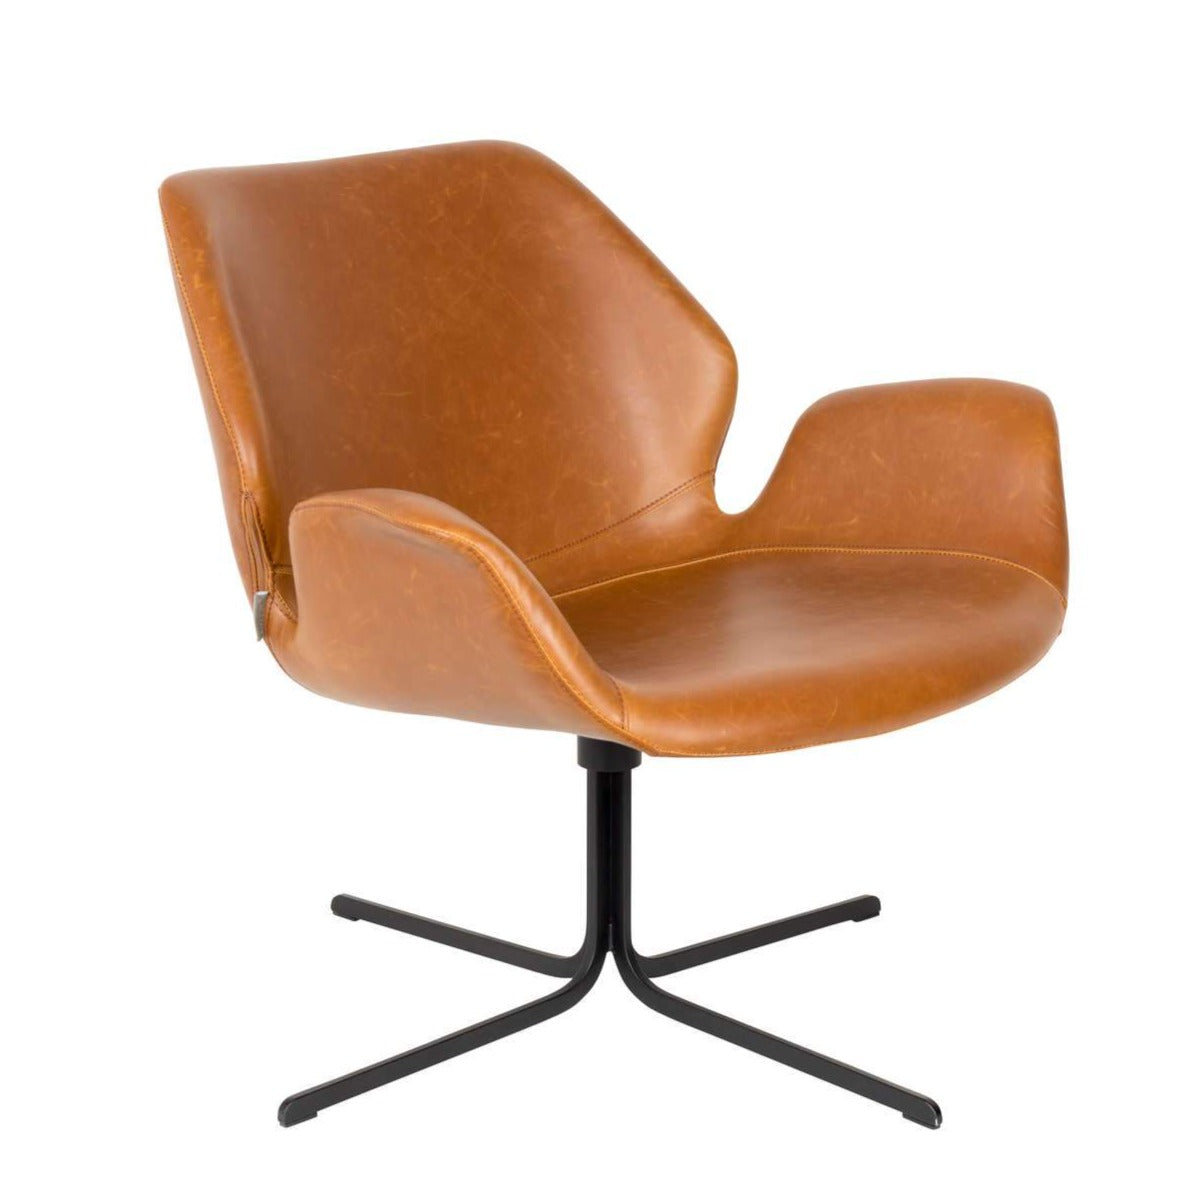 Do you remember this rotary armchair that you couldn't rotate in your childhood? The Zuiver Nikki armchair is a piece of furniture that will help in the realization of these children's dreams. It will be complemented by a modern living room, a classic style office and a vintage dressing room in the bedroom. High -quality PU leather ensures ease of cleaning and the convenience of top -shelf filming. The unobtrusive metal legs will not overwhelm any room. Don't worry, they provide decent stabilization!